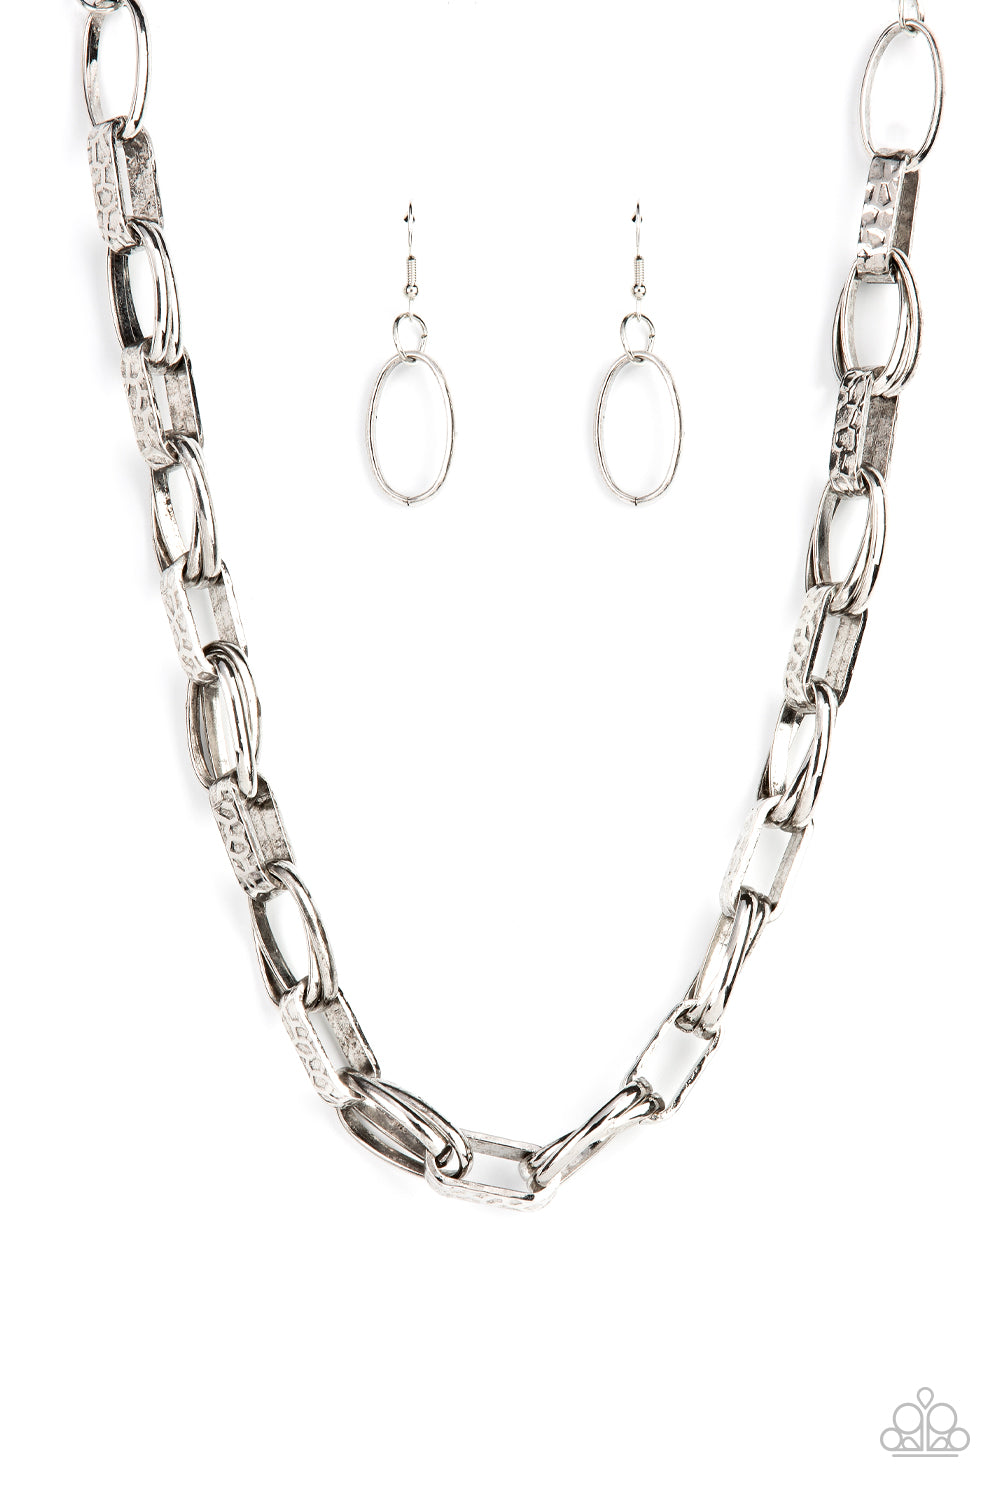 Motley In Motion Paparazzi Accessories Necklace with Earrings Silver